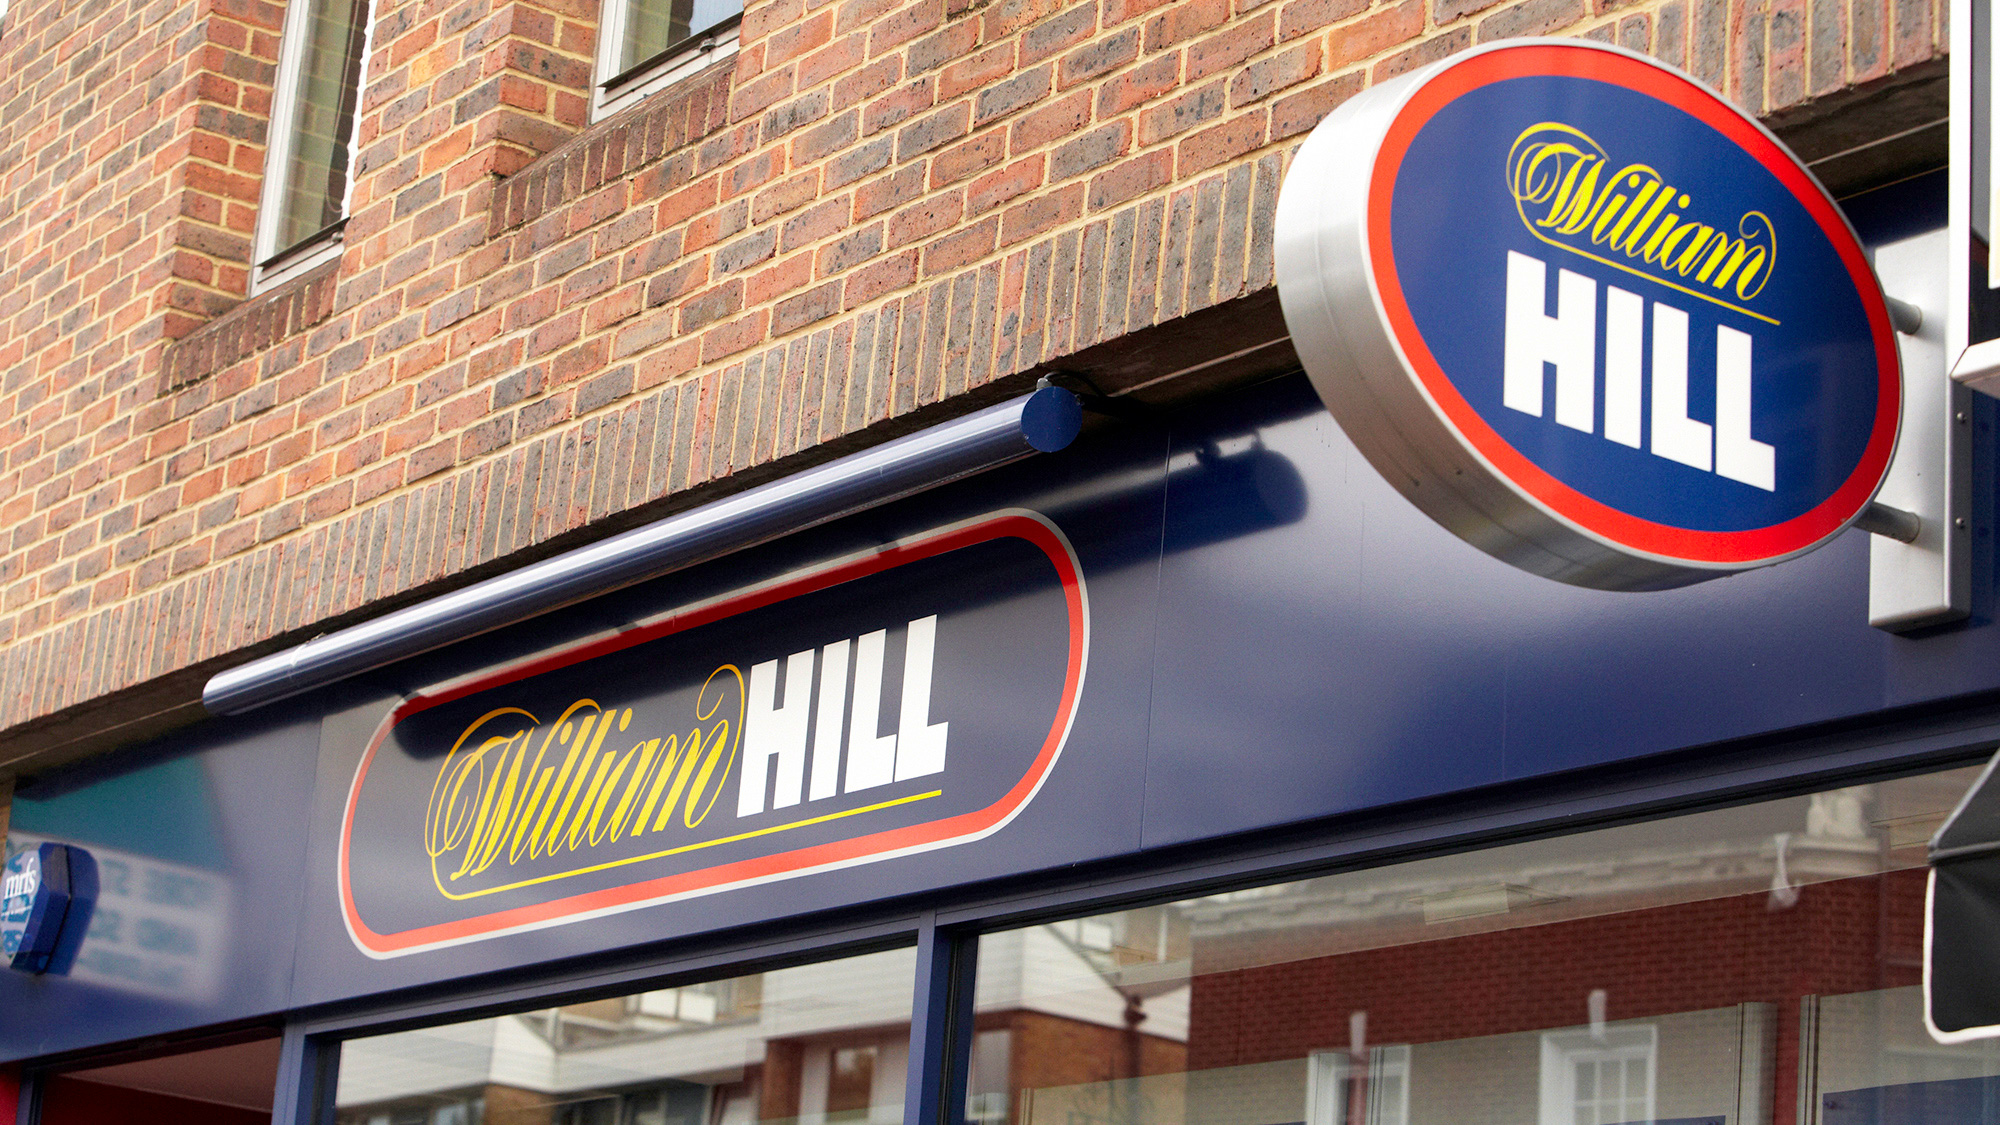 William Hill retail shop signs